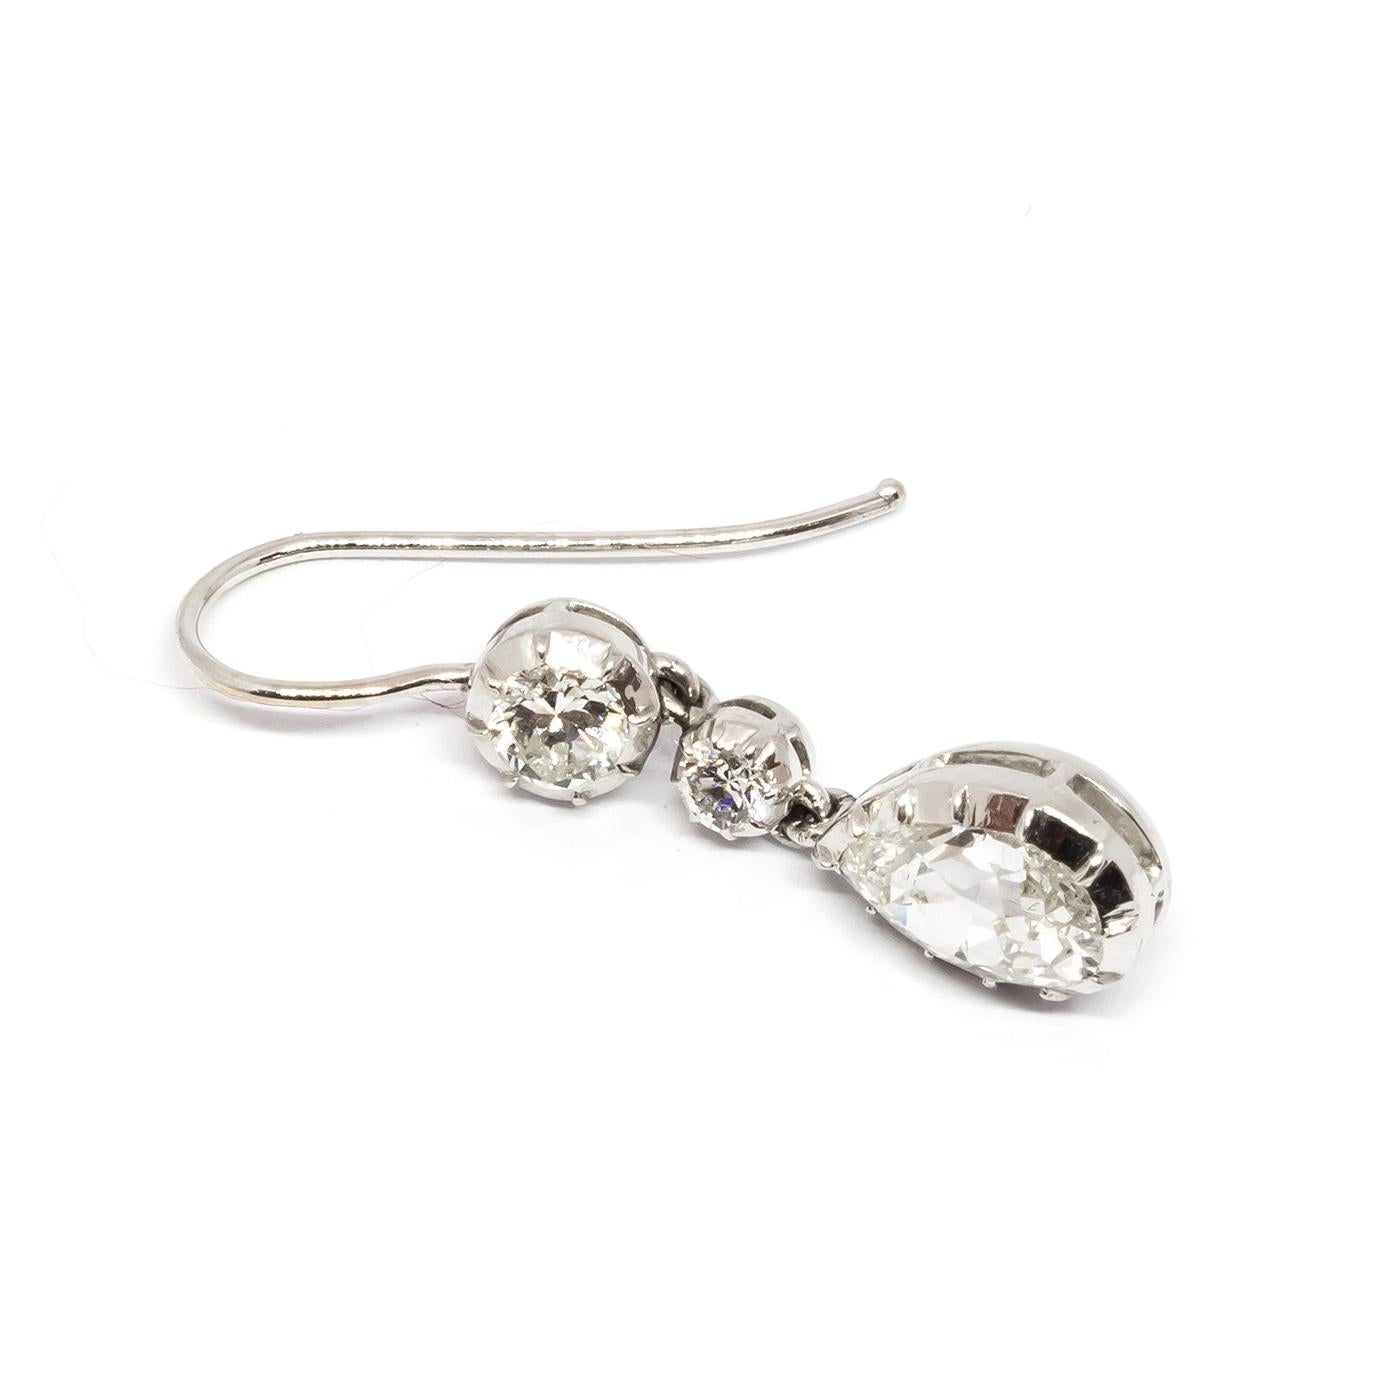 Diamond drop earrings in cut down style settings, with two round brilliant-cut diamonds and old-cut diamond drop shape diamond at the bottom. Each pear shape diamond weighing approximatley 1.00cts. Estimated total diamond weight 2.36cts